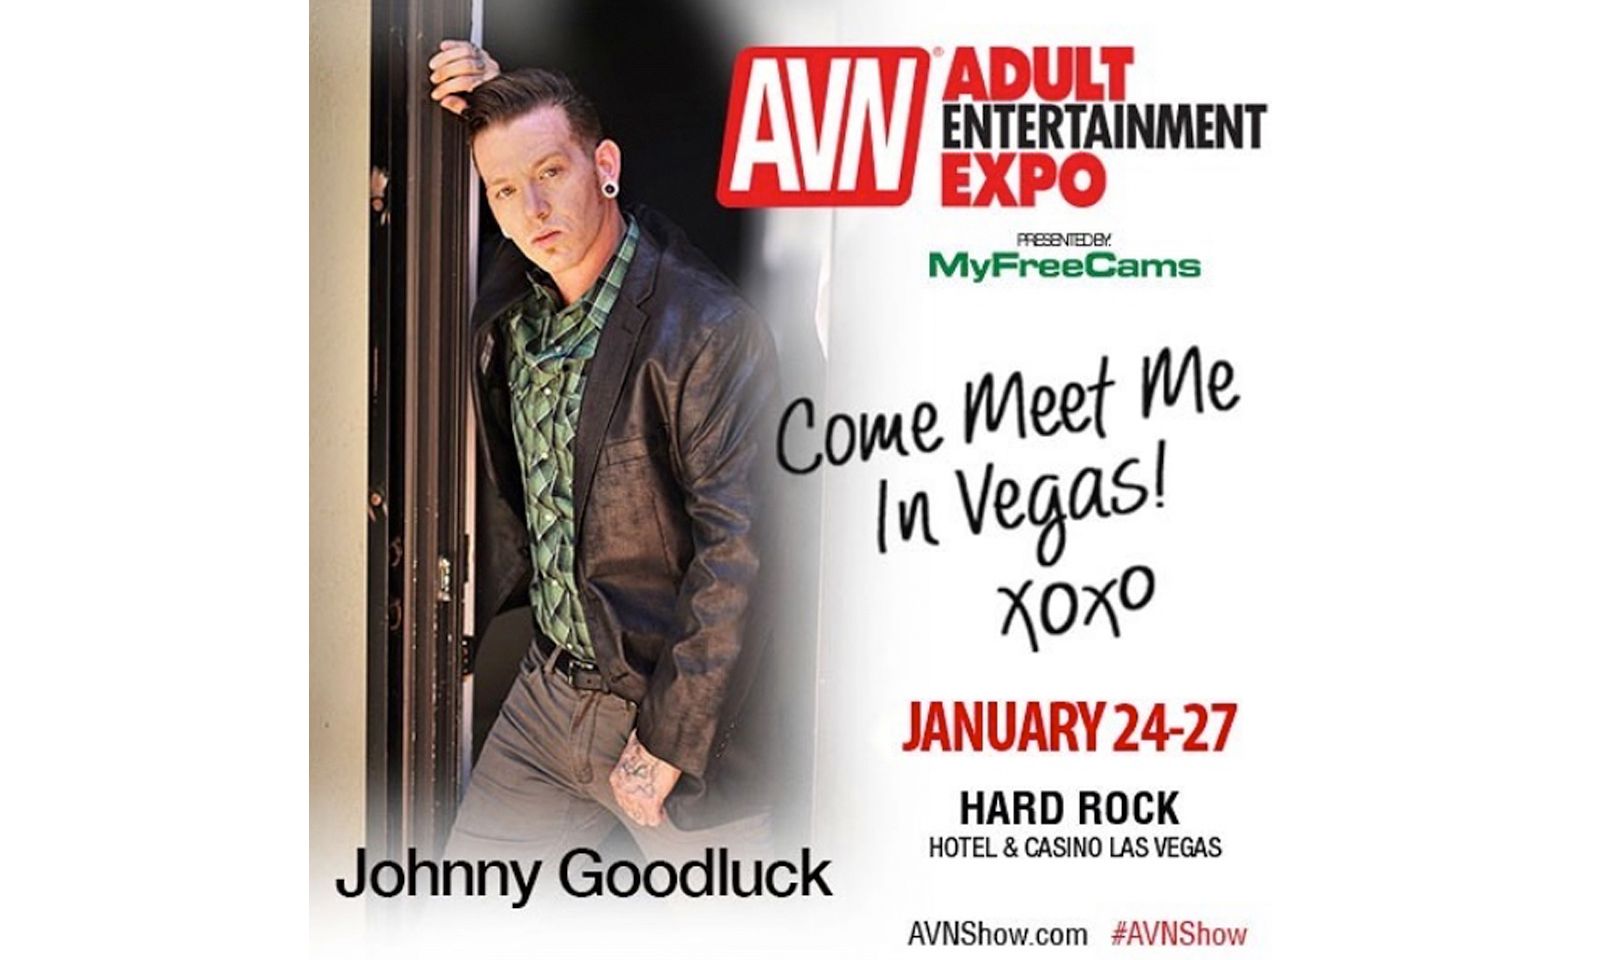 Johnny Goodluck Heads to 1st AEE as Performer